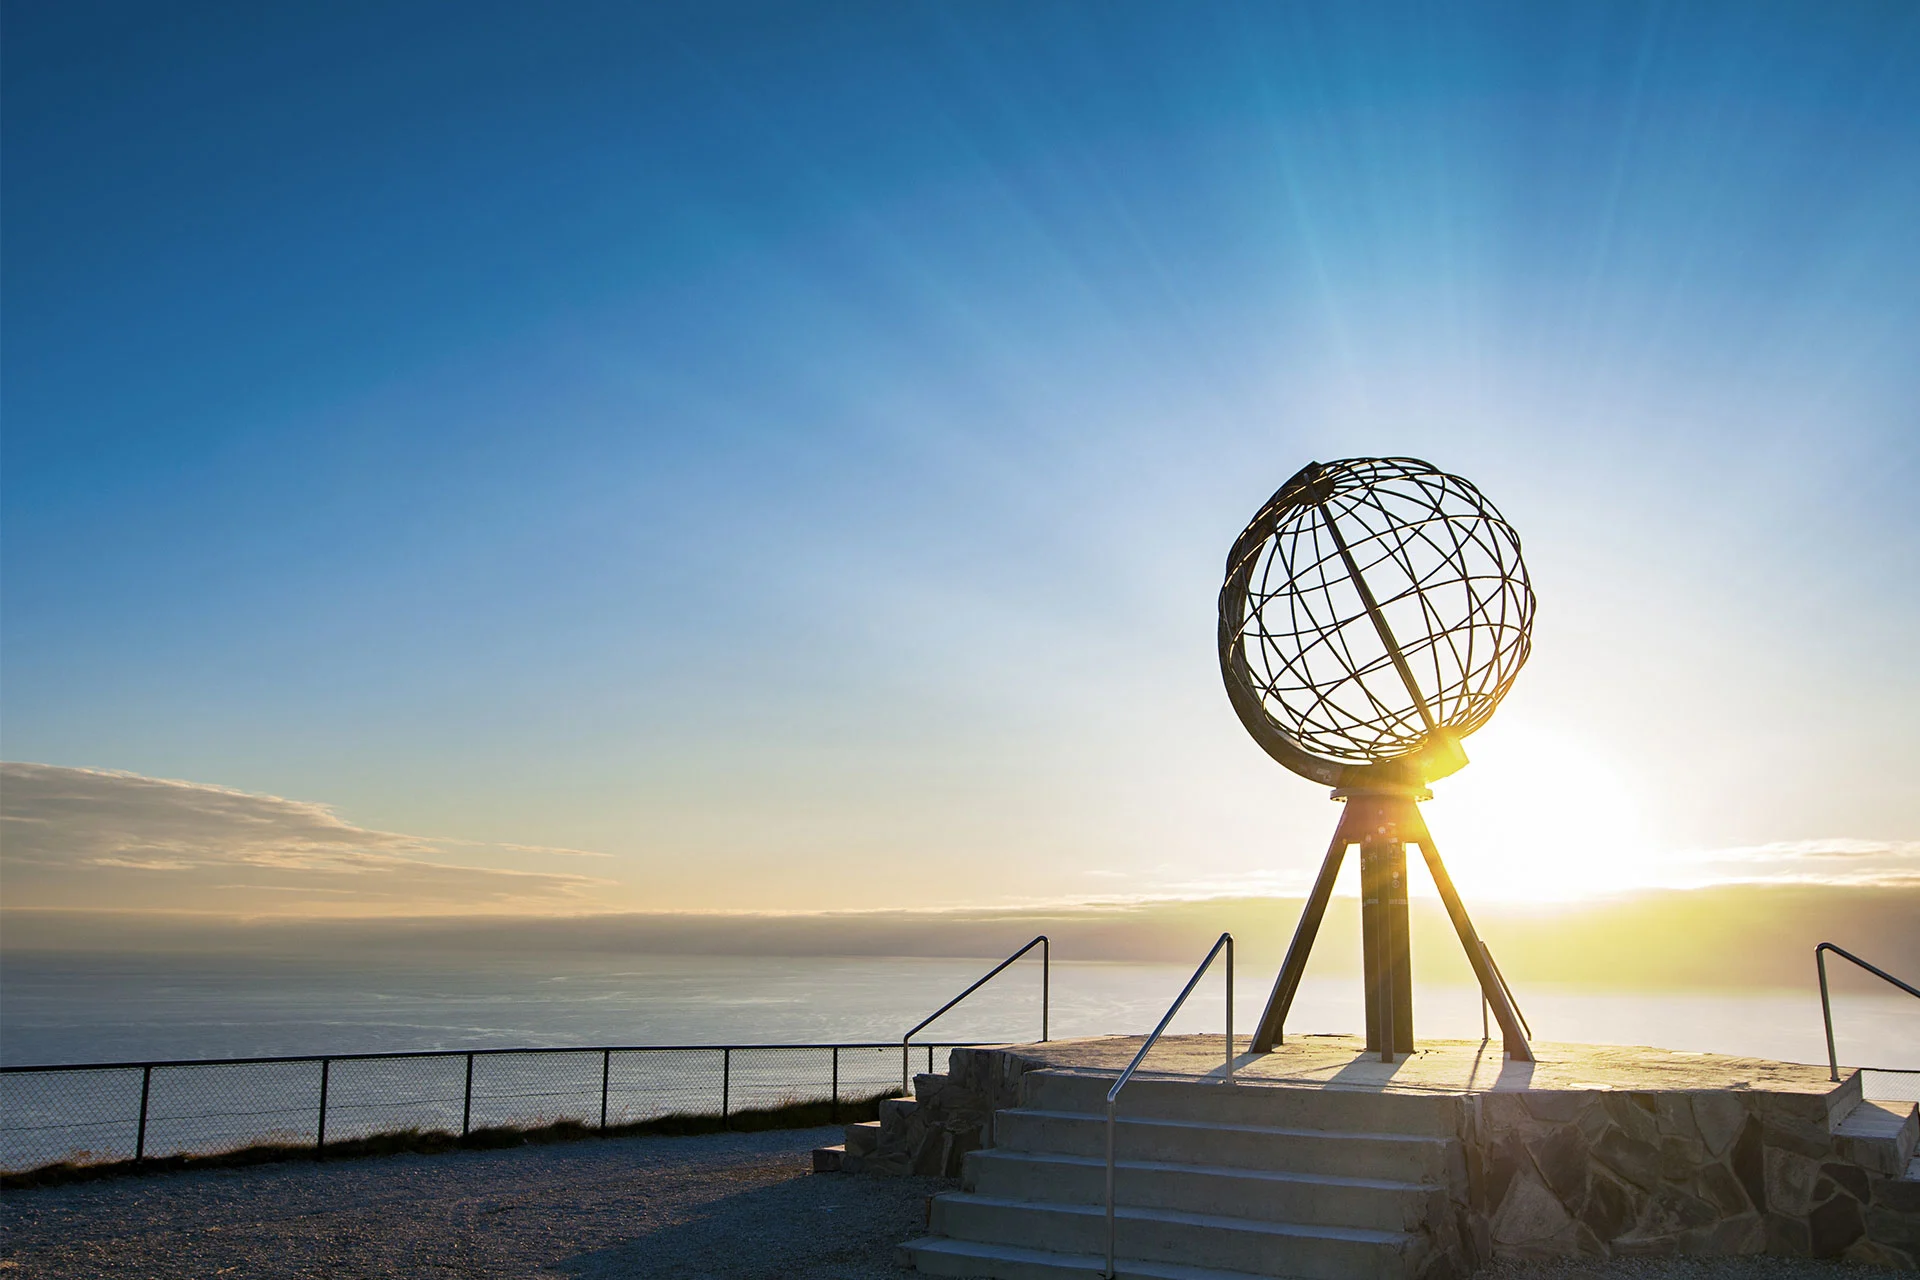 The Globe Monument at the North Cape in Norway